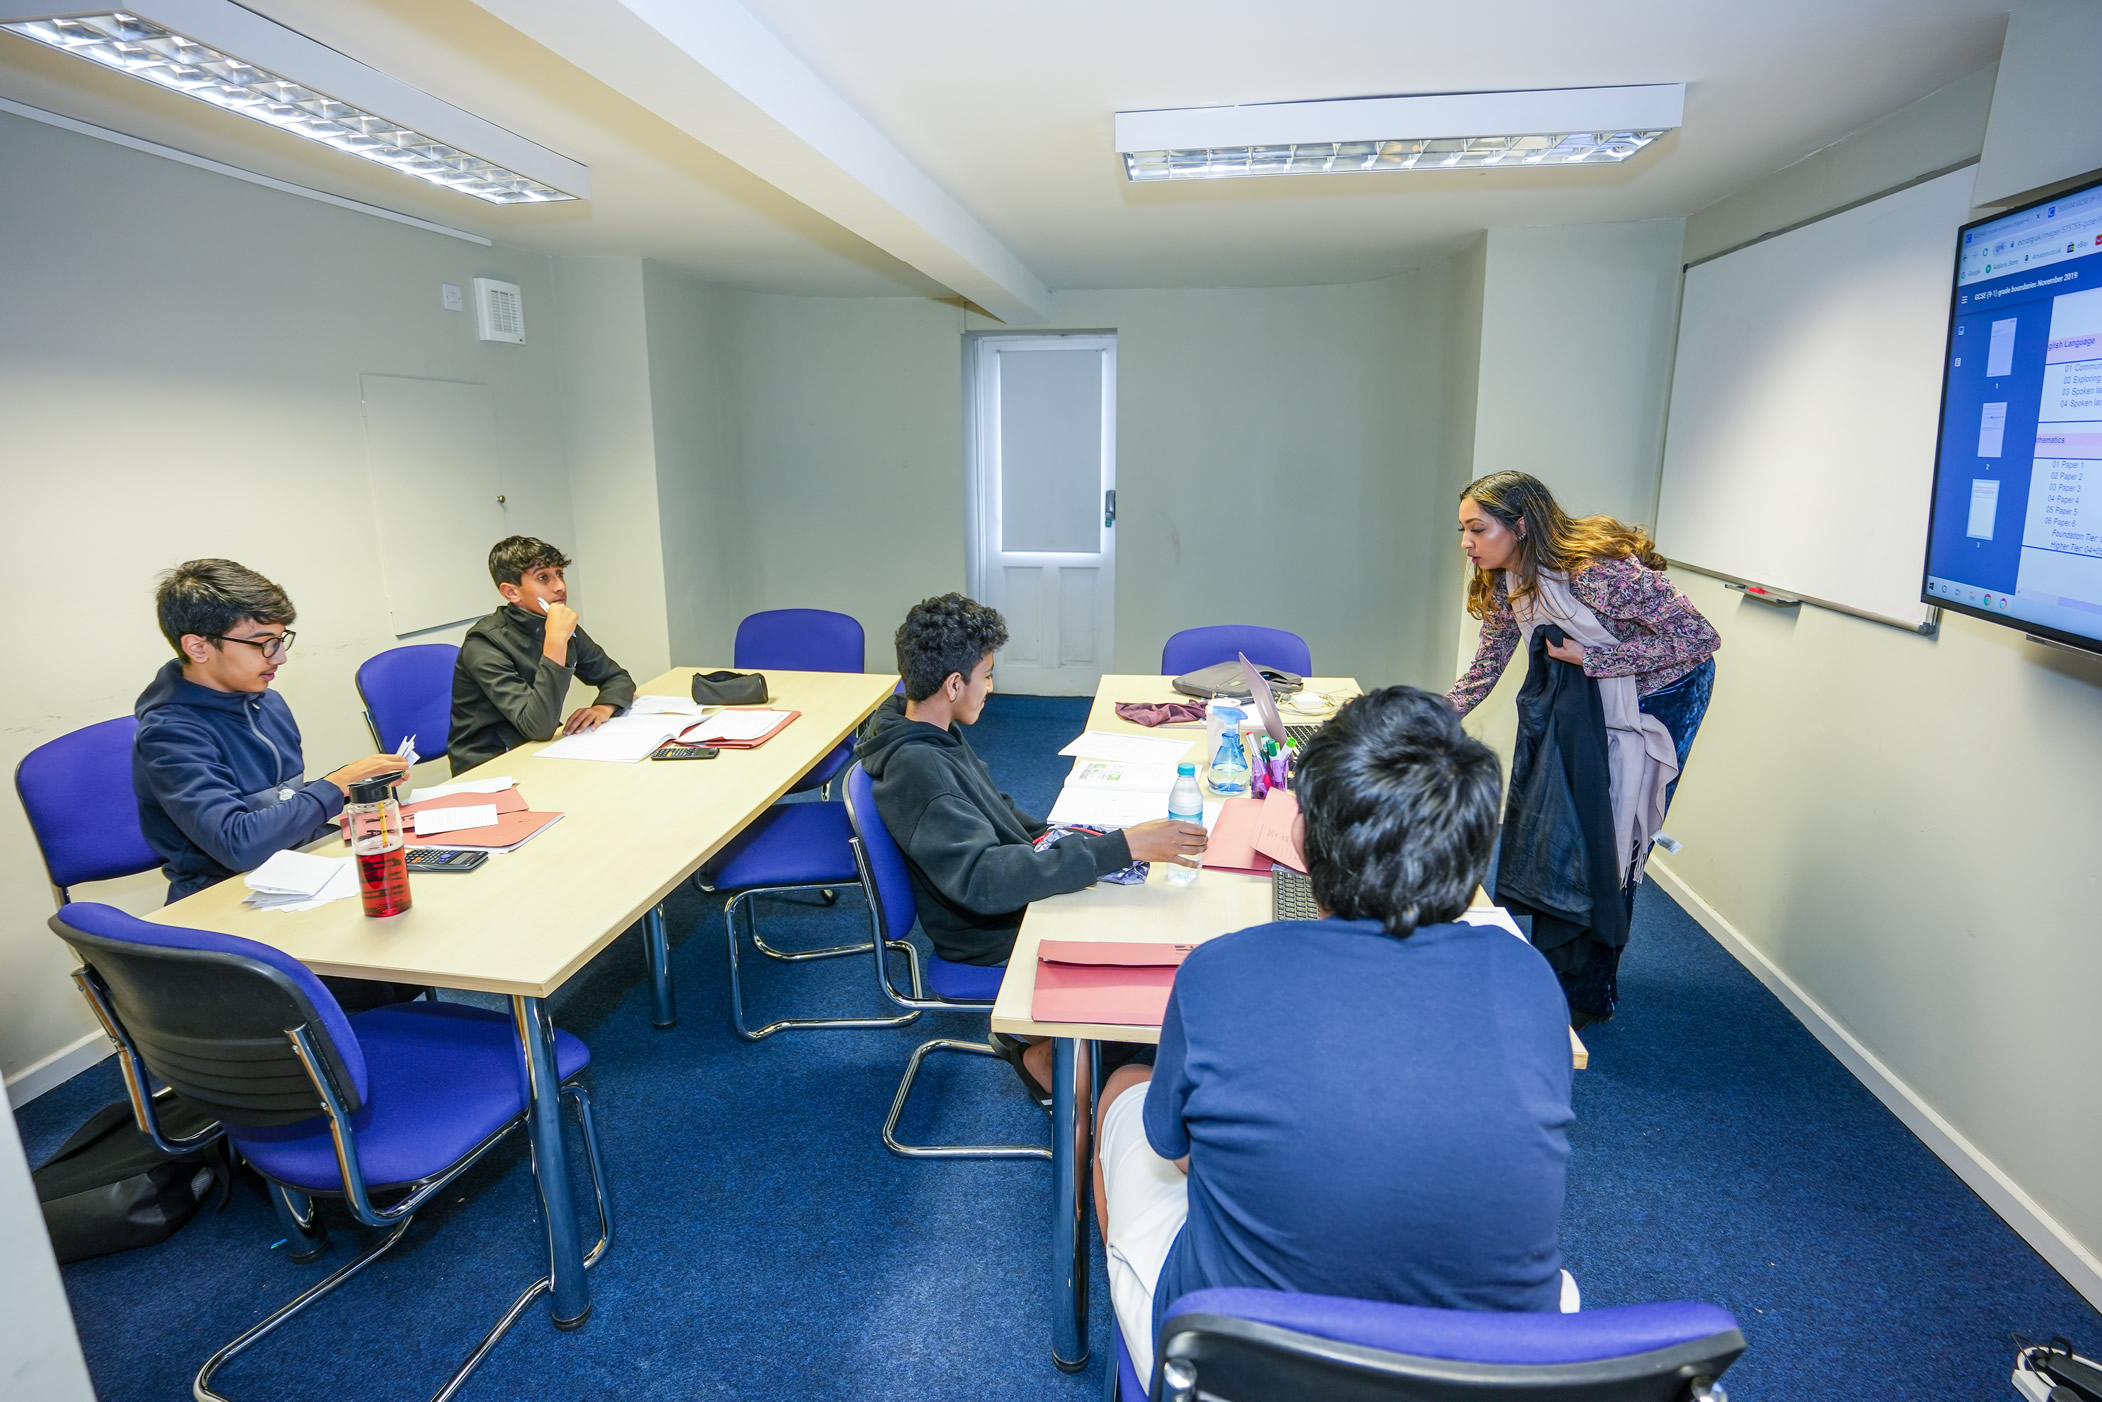 An image of private tuition in the classroom.